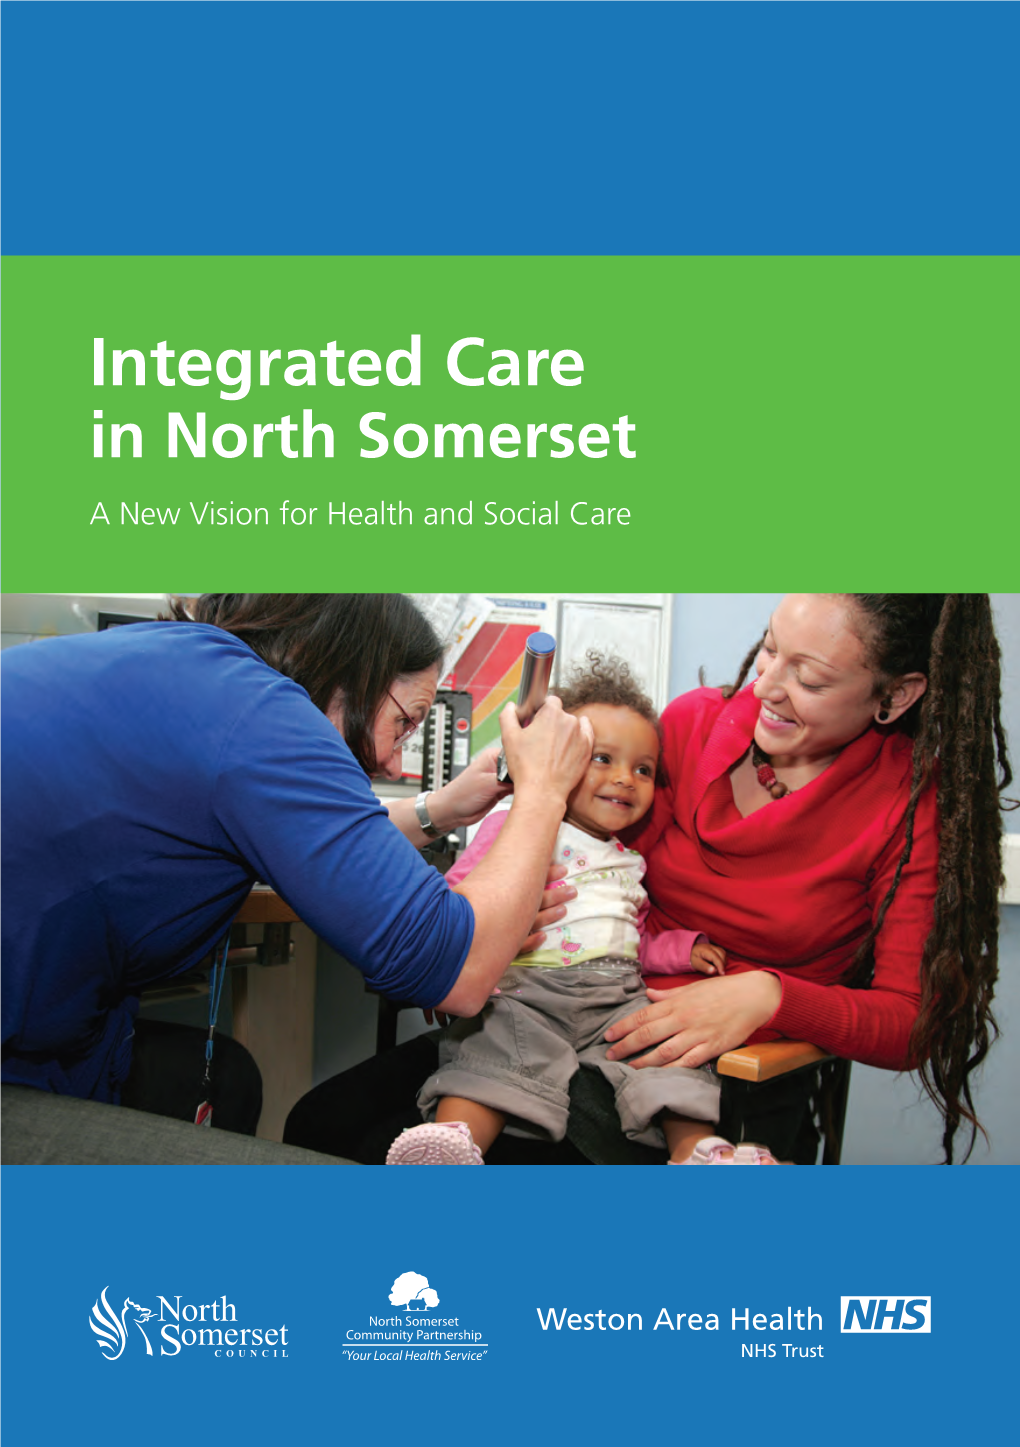 Integrated Care in North Somerset a New Vision for Health and Social Care Introduction